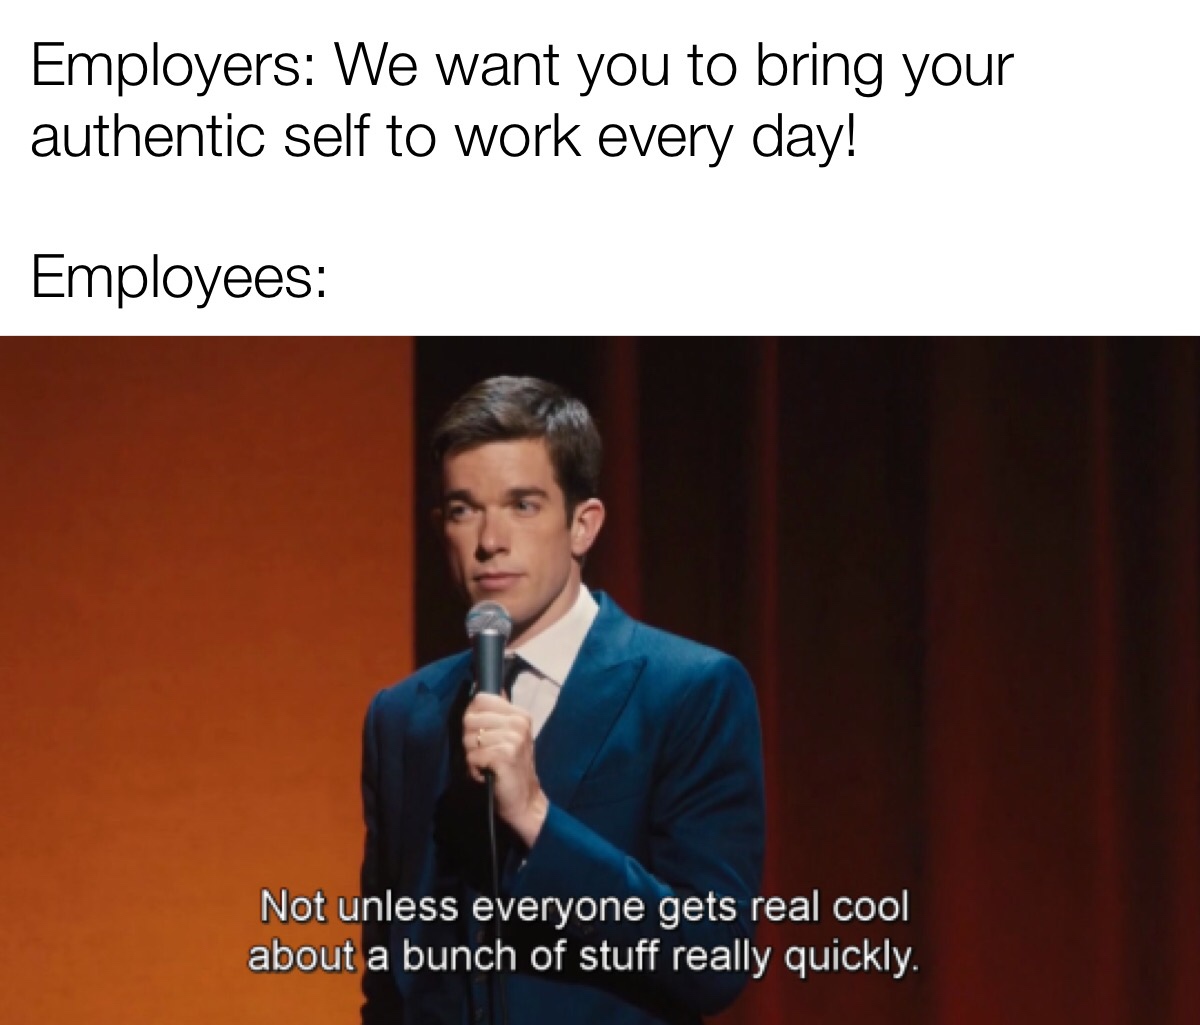 not unless everyone gets real cool - Employers We want you to bring your authentic self to work every day! Employees Not unless everyone gets real cool about a bunch of stuff really quickly.